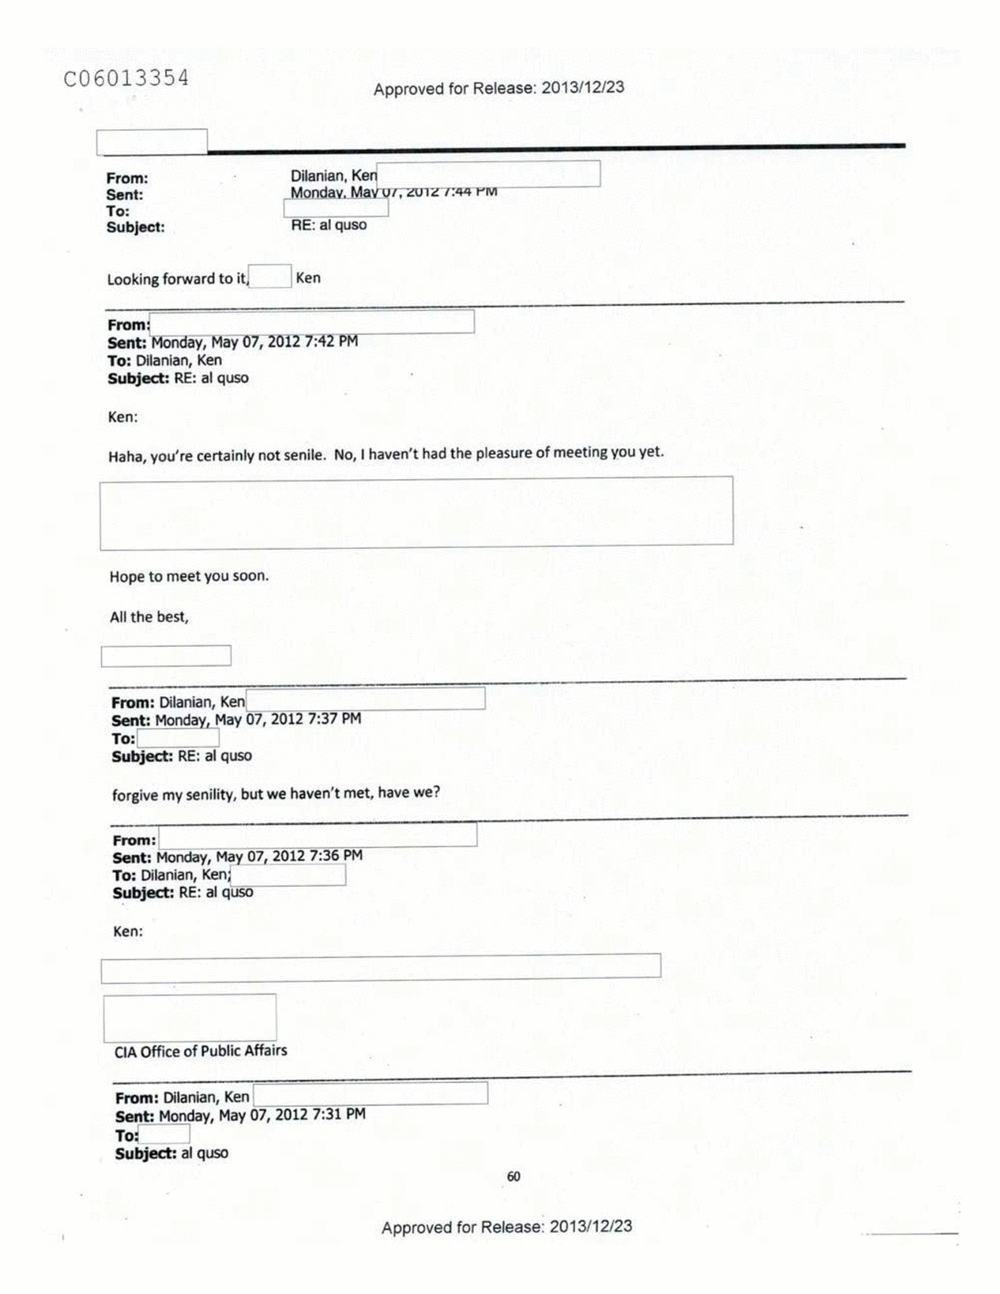 Page 268 from Email Correspondence Between Reporters and CIA Flacks